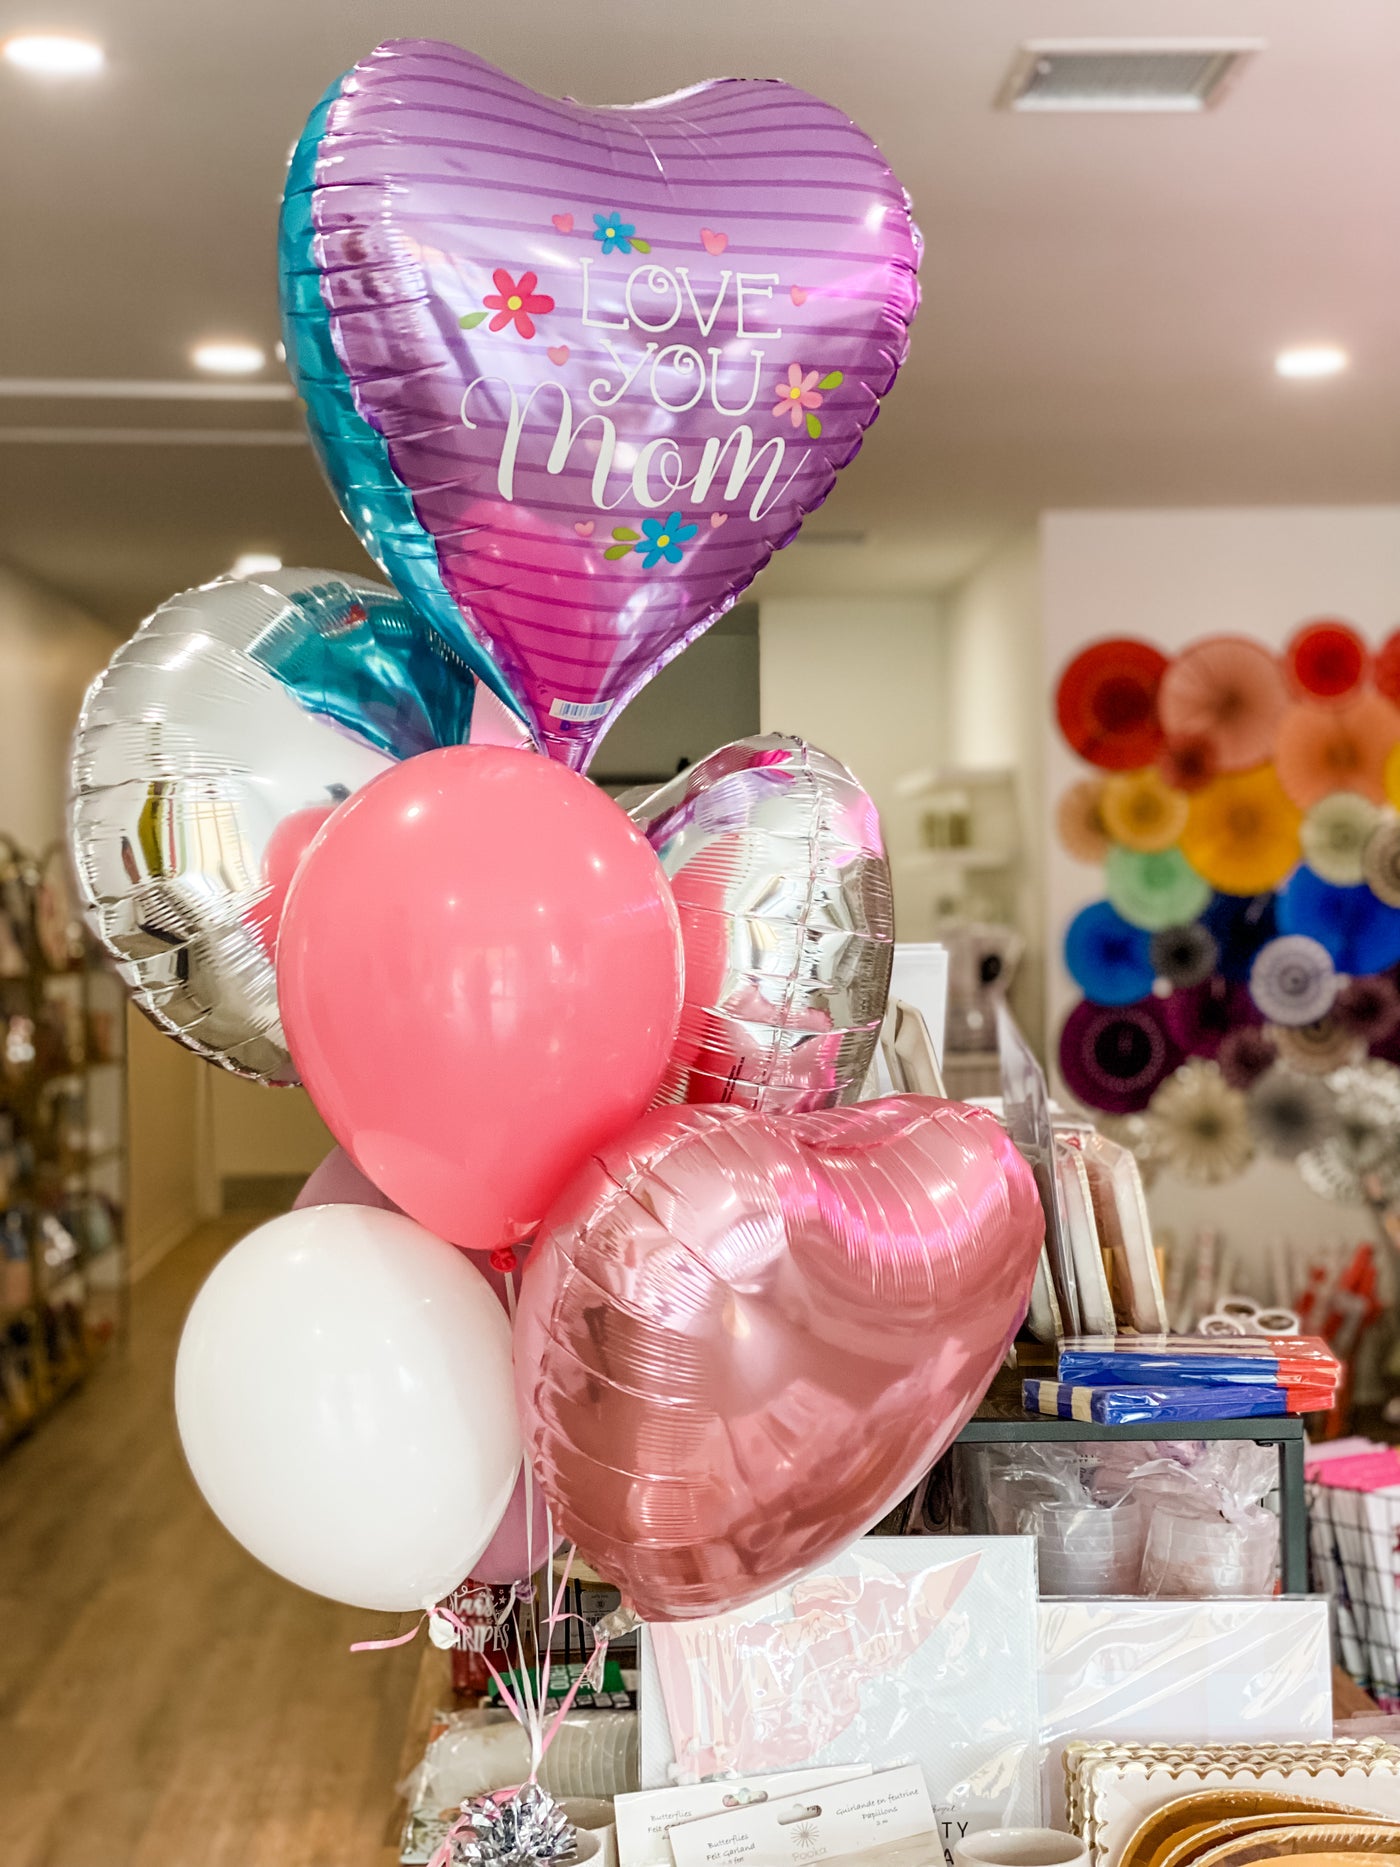 Mother's Day Balloon Bouquets